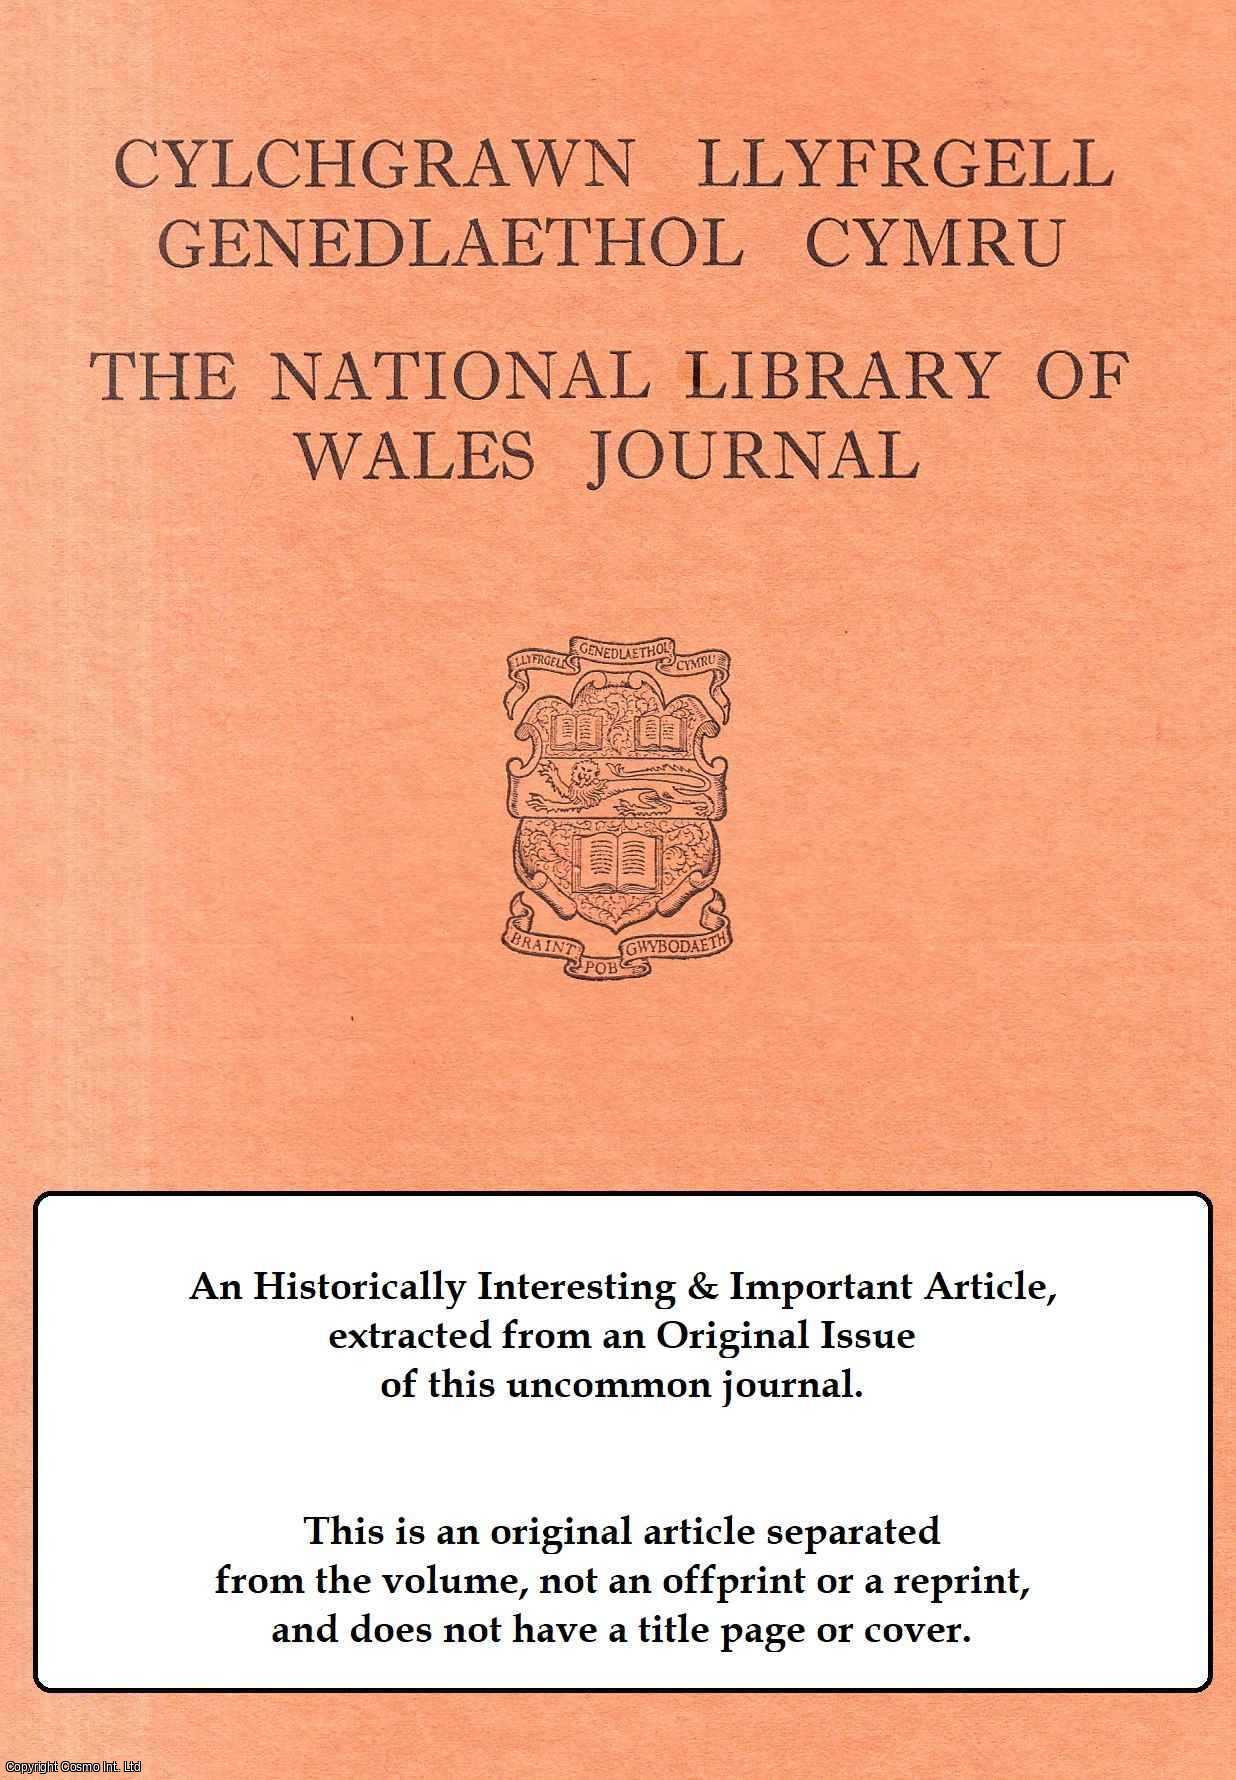 Elisabeth Inglis-Jones - A Pembrokeshire County Family in The Eighteenth Century - Part II. An original article from The National Library of Wales Journal, 1972.